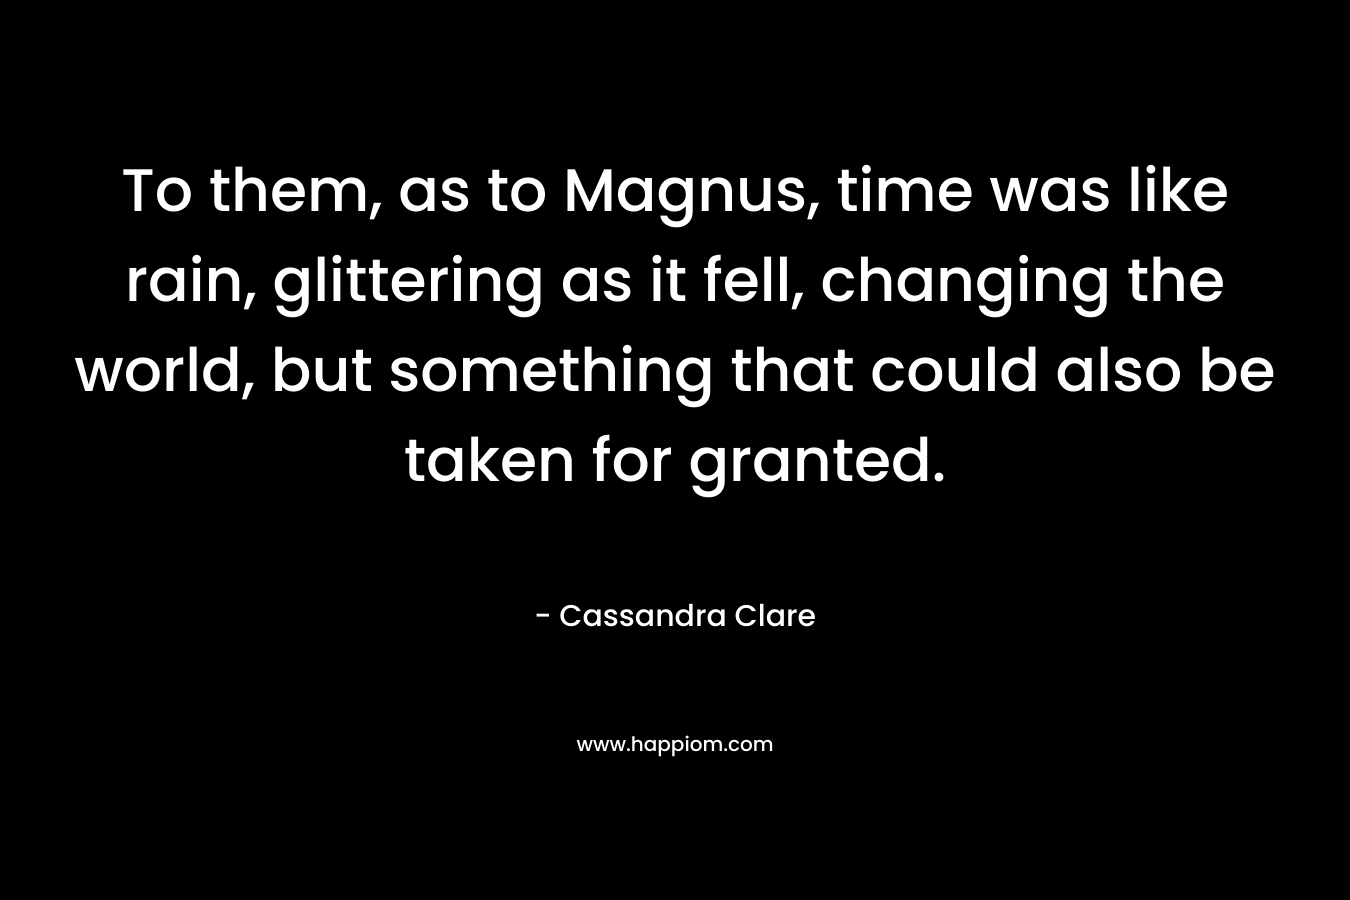 To them, as to Magnus, time was like rain, glittering as it fell, changing the world, but something that could also be taken for granted.